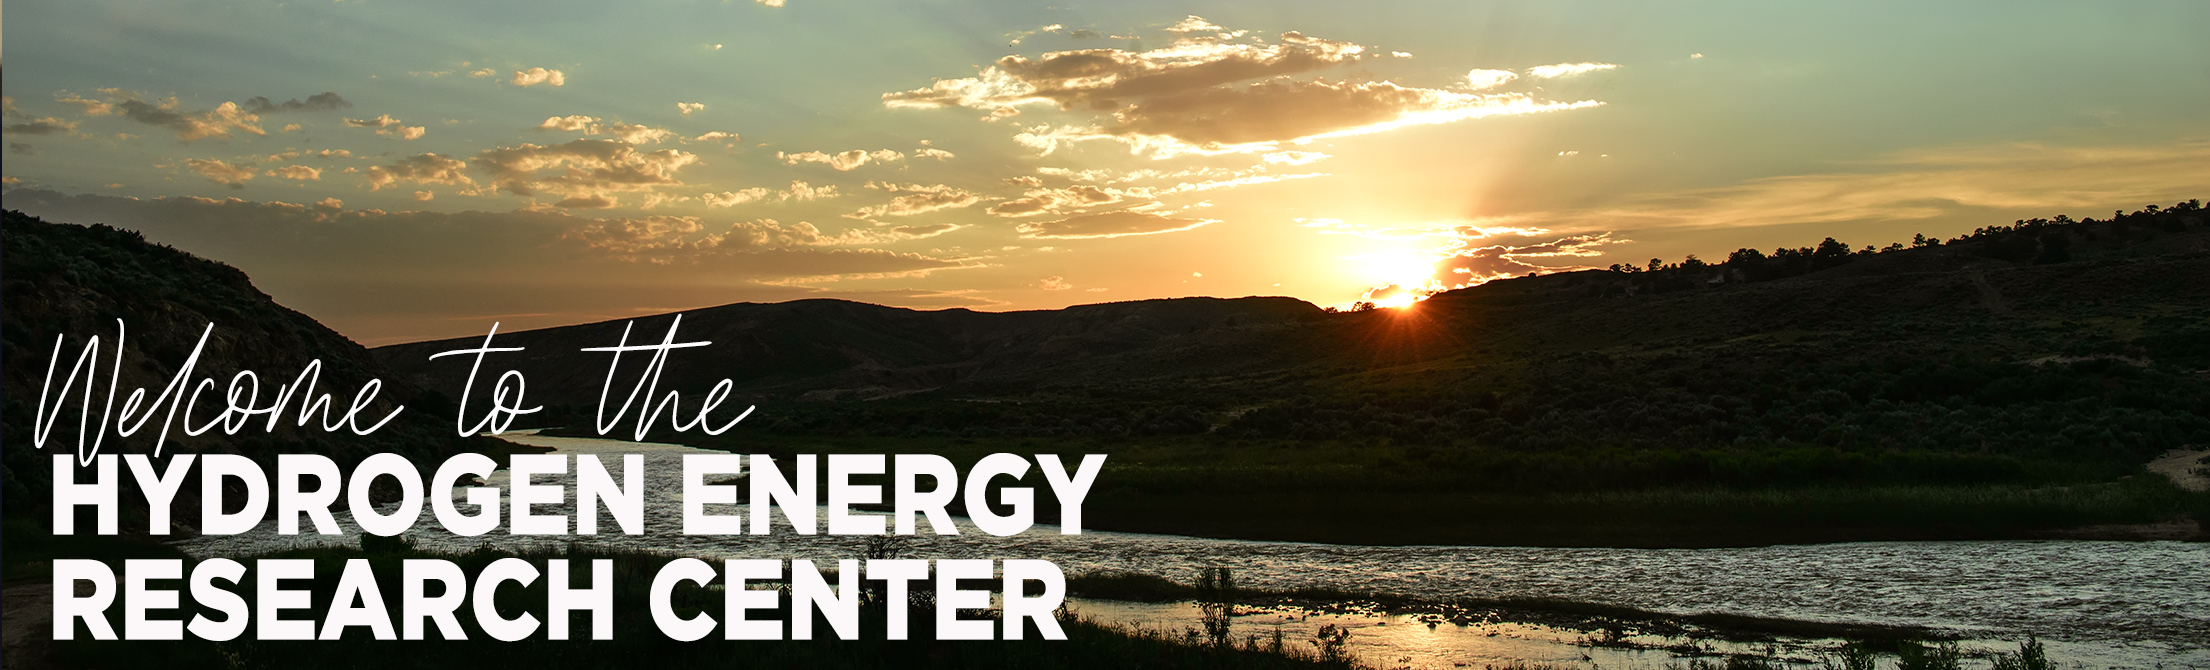 Sunset over a river with text that says Hydrogen Energy Research Center